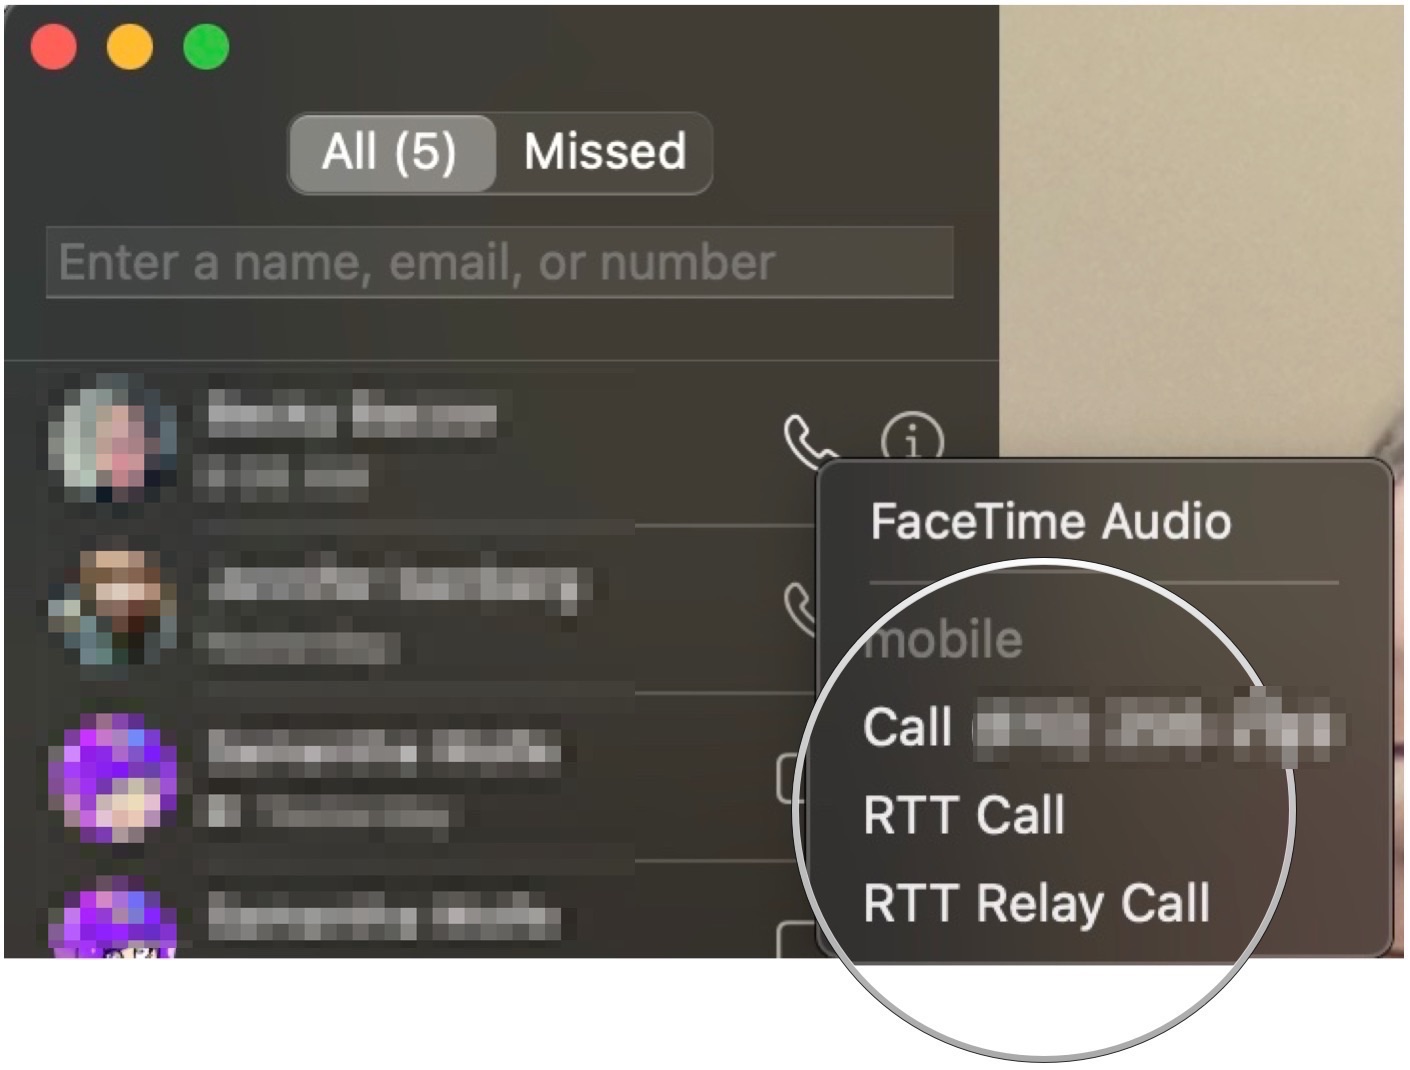 To make an RTT call on Mac, click the audio button next to the contact or after entering a phone number. Choose RTT Call or RTT Relay Call.